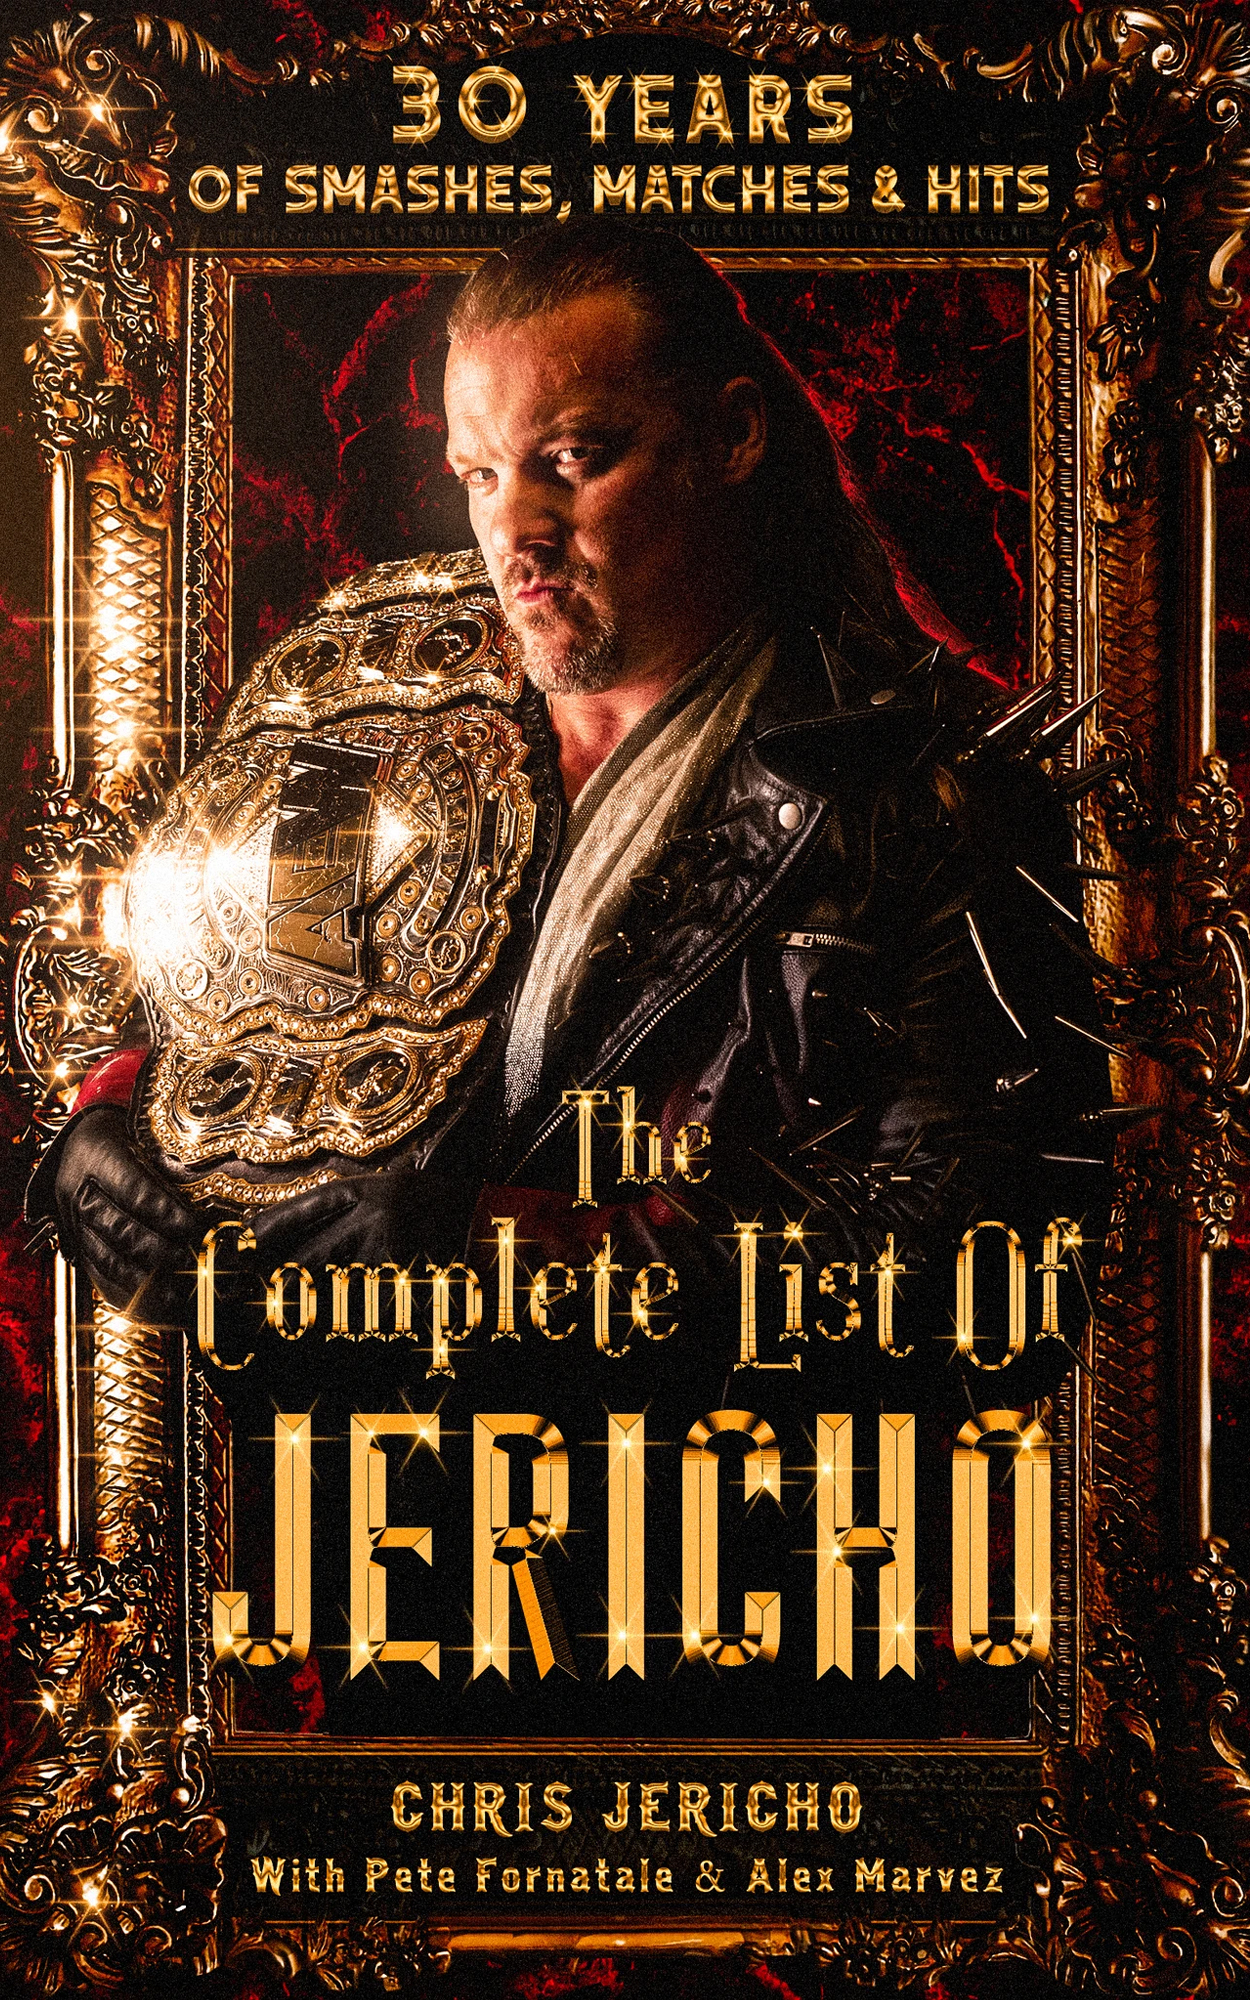 The Complete List of Jericho